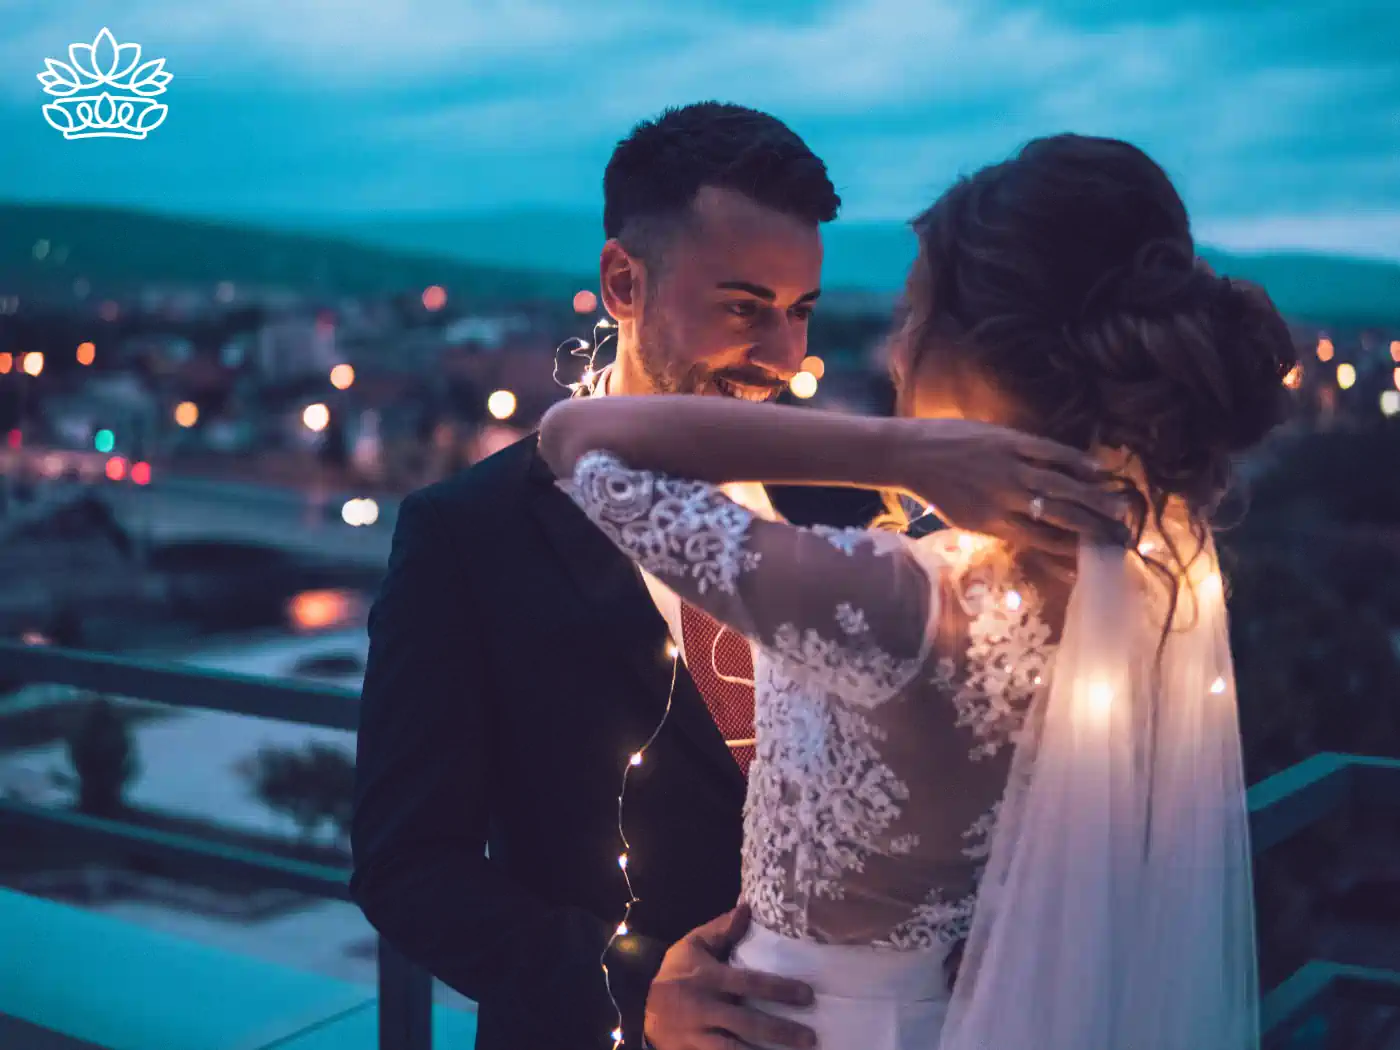 A bride and groom embracing on a rooftop decorated with fairy lights, capturing a magical wedding moment. Fabulous Flowers and Gifts. Romantic Gift Boxes.